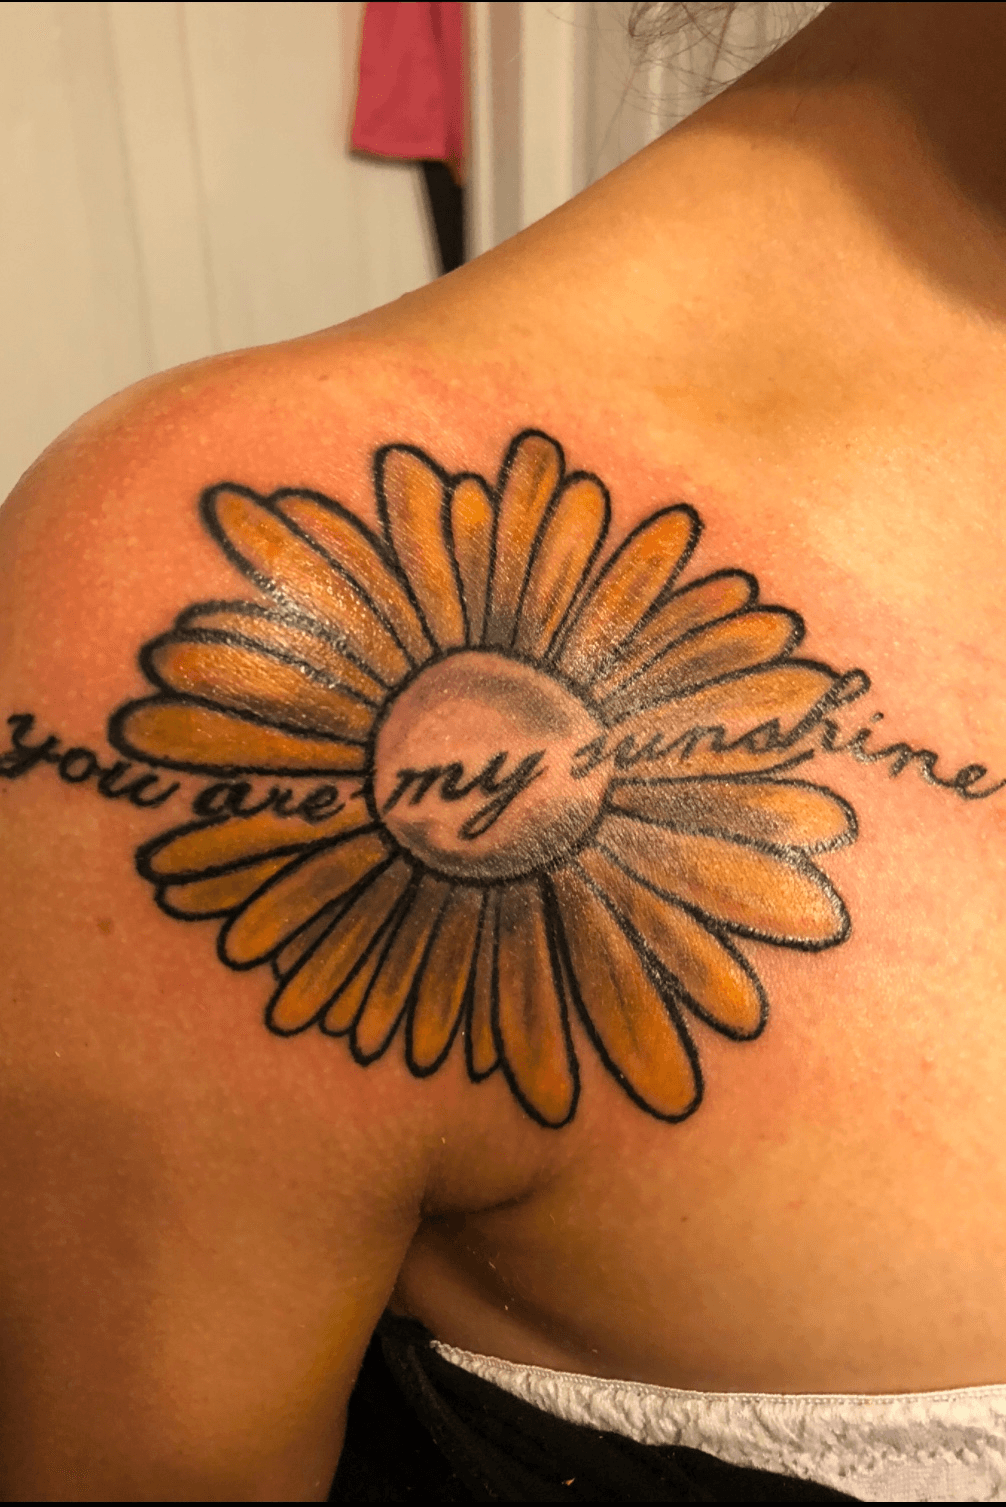 101 Amazing You Are My Sunshine Tattoo Ideas You Need To See  Outsons   Mens Fashion Tips And Style Guides  Sunshine tattoo Tattoos for  daughters Tattoos